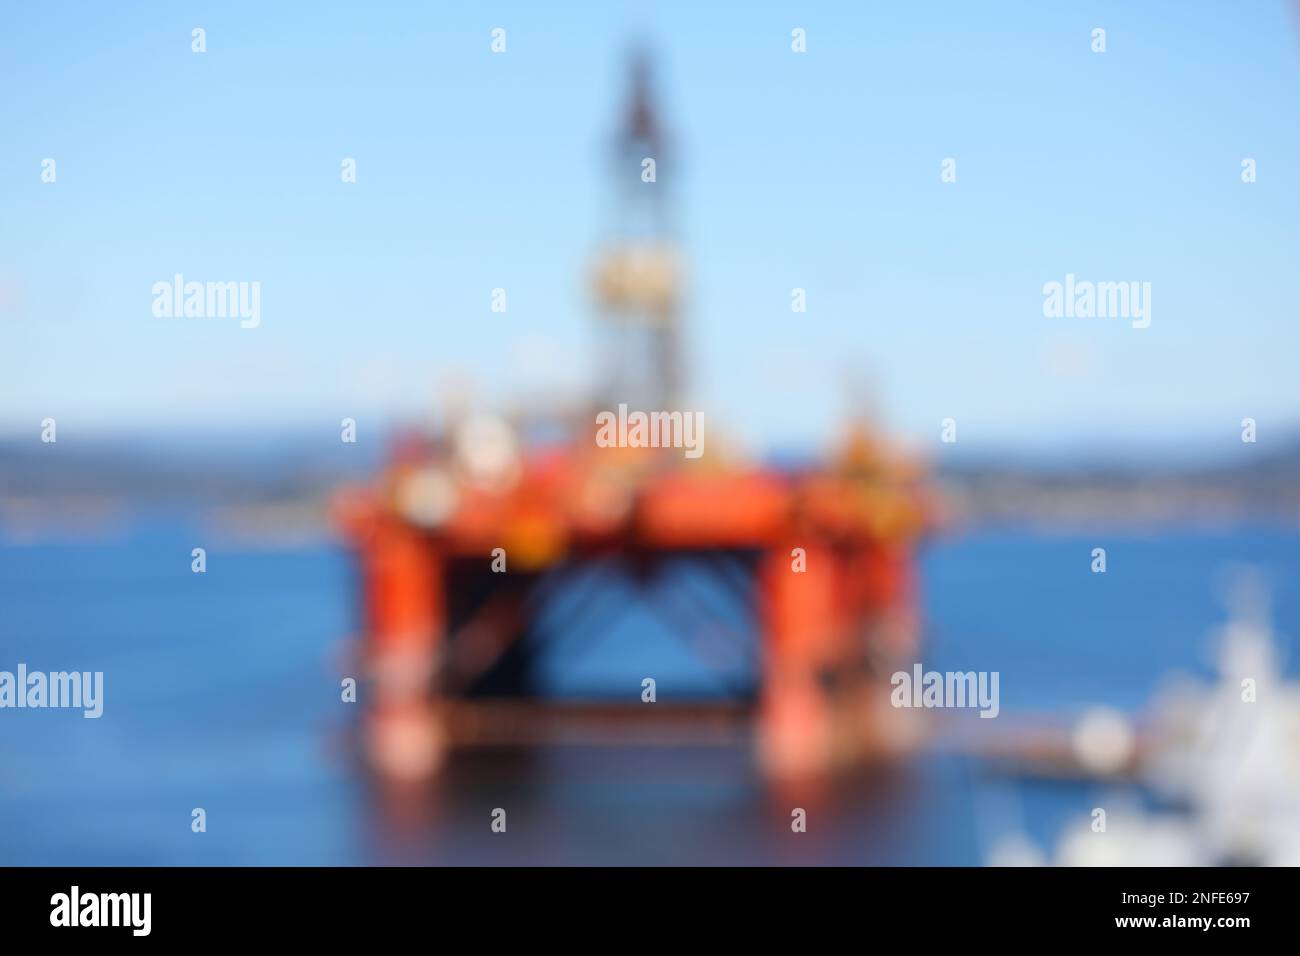 Abstract oil rig background. Offshore oil drilling platform defocused image. Stock Photo